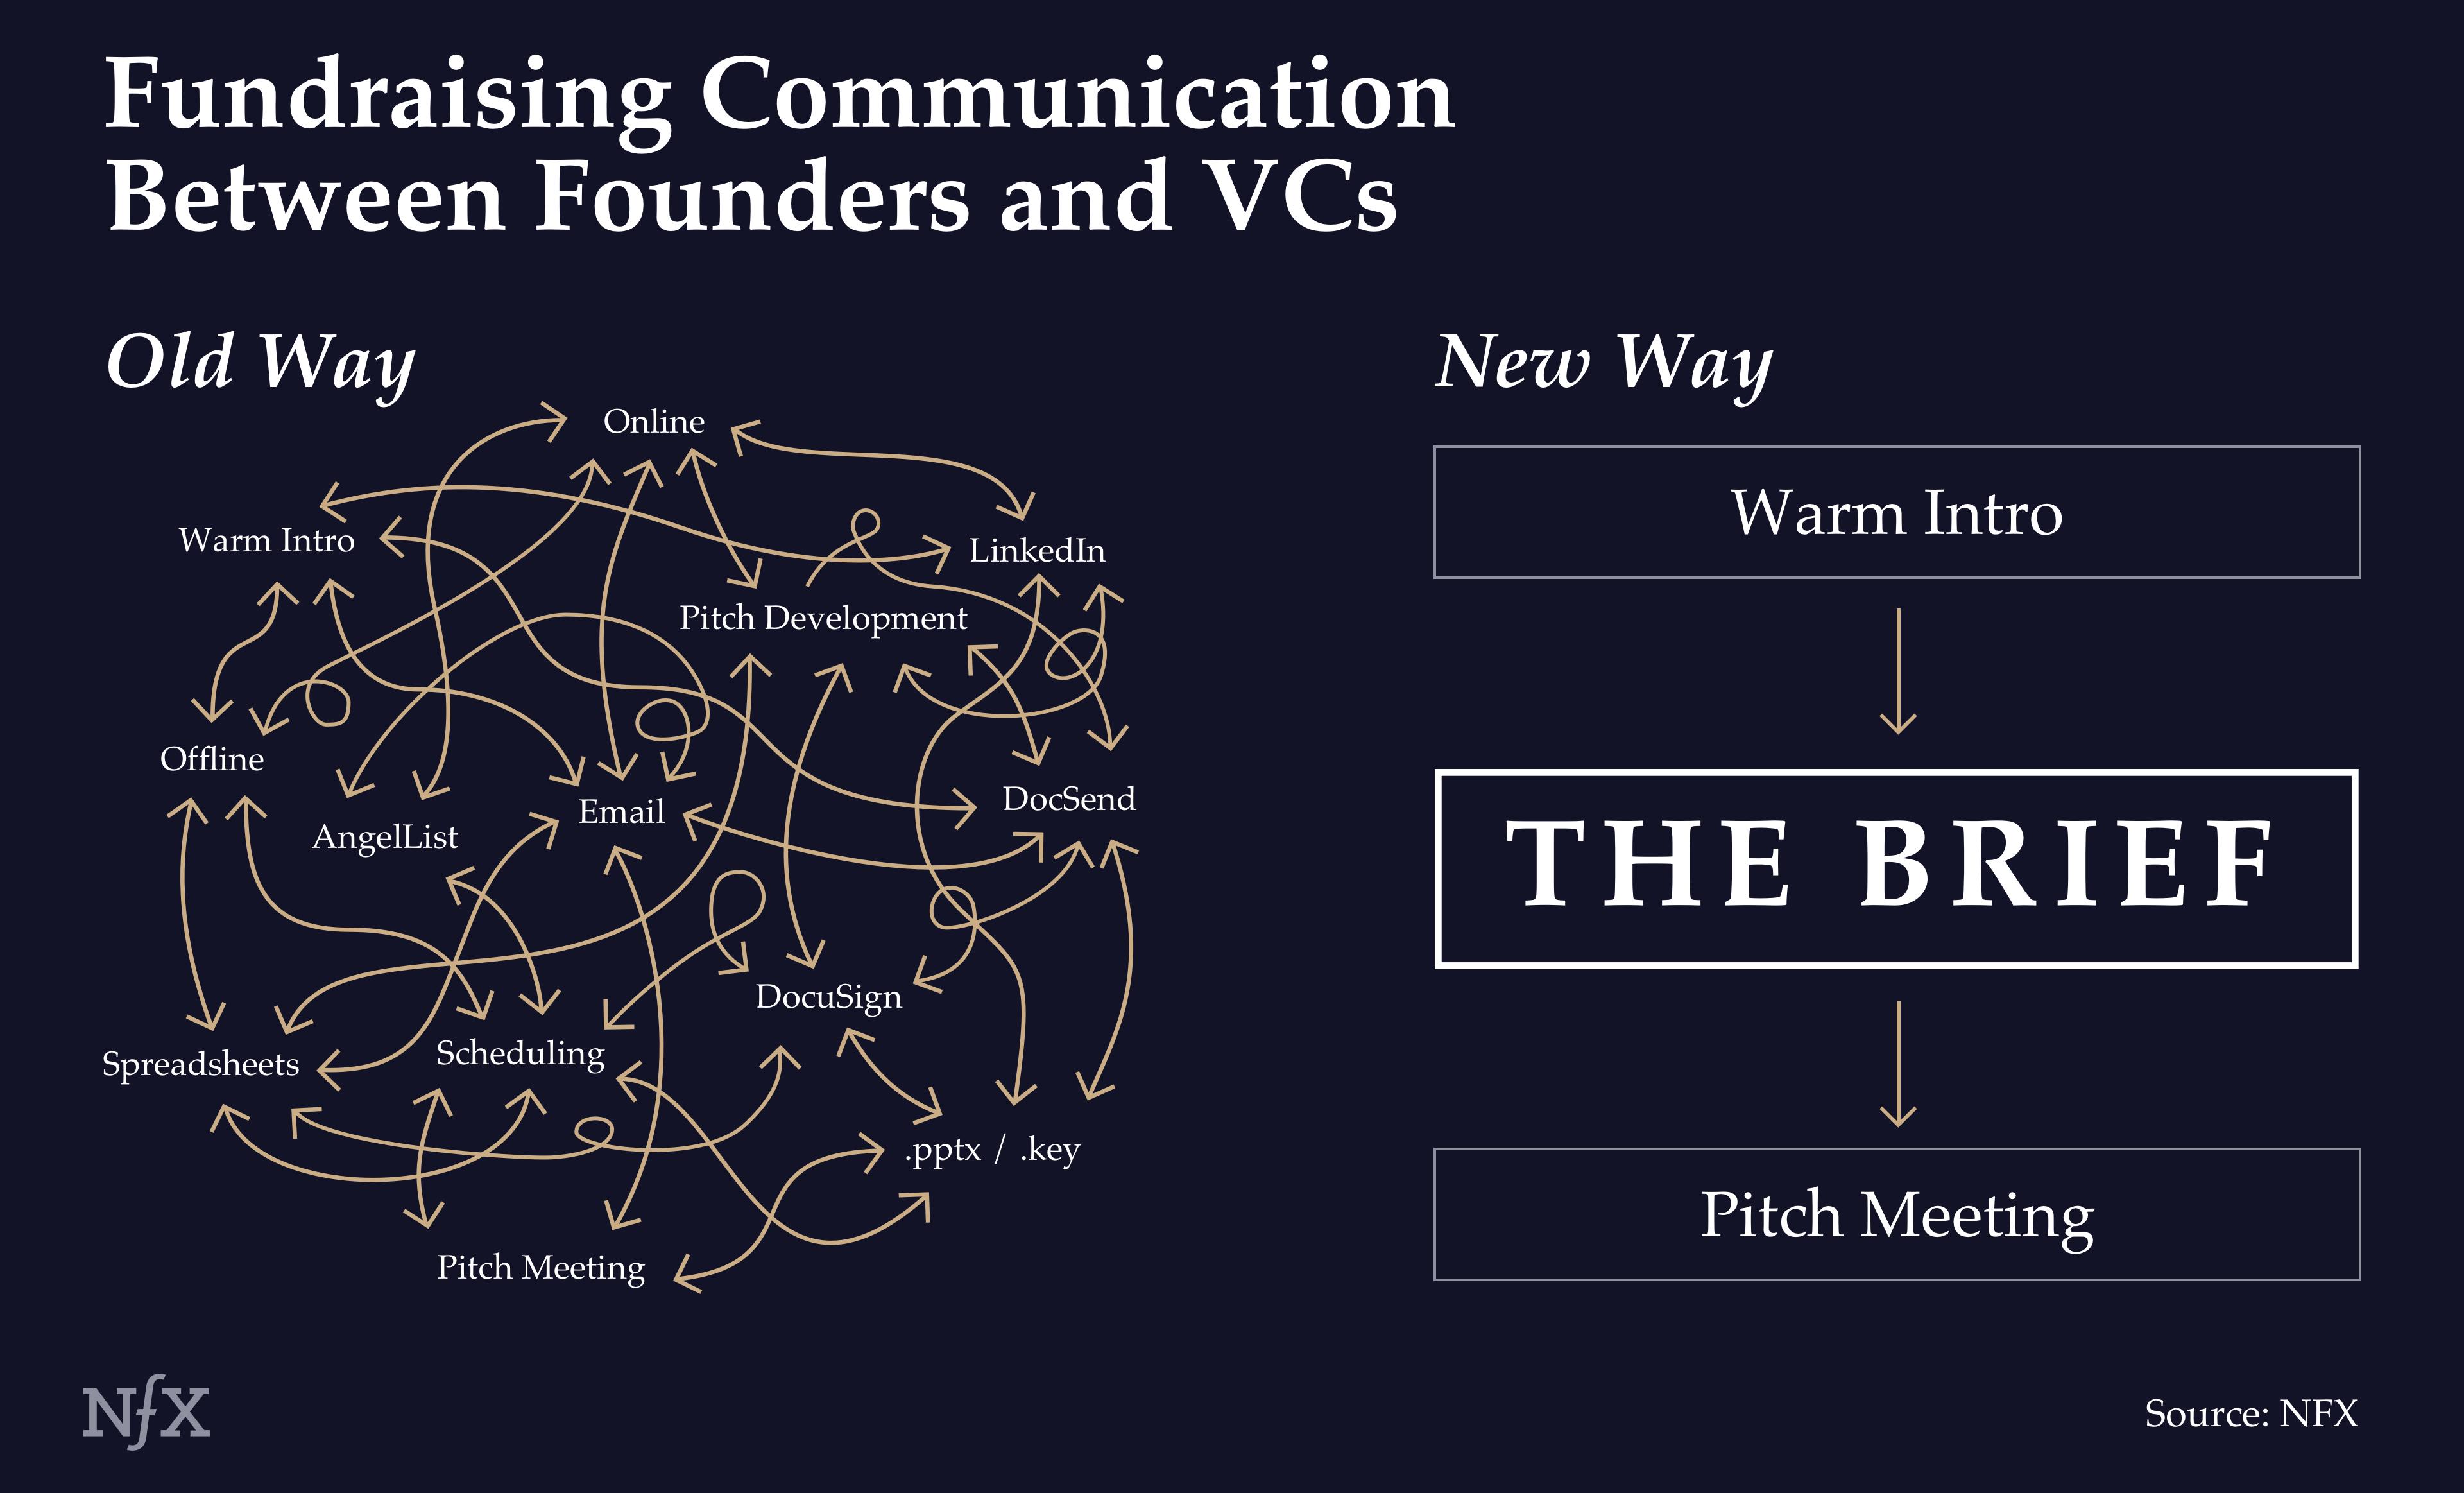 Old vs. New Comparison of Fundraising Communication Between Founder and Vcs